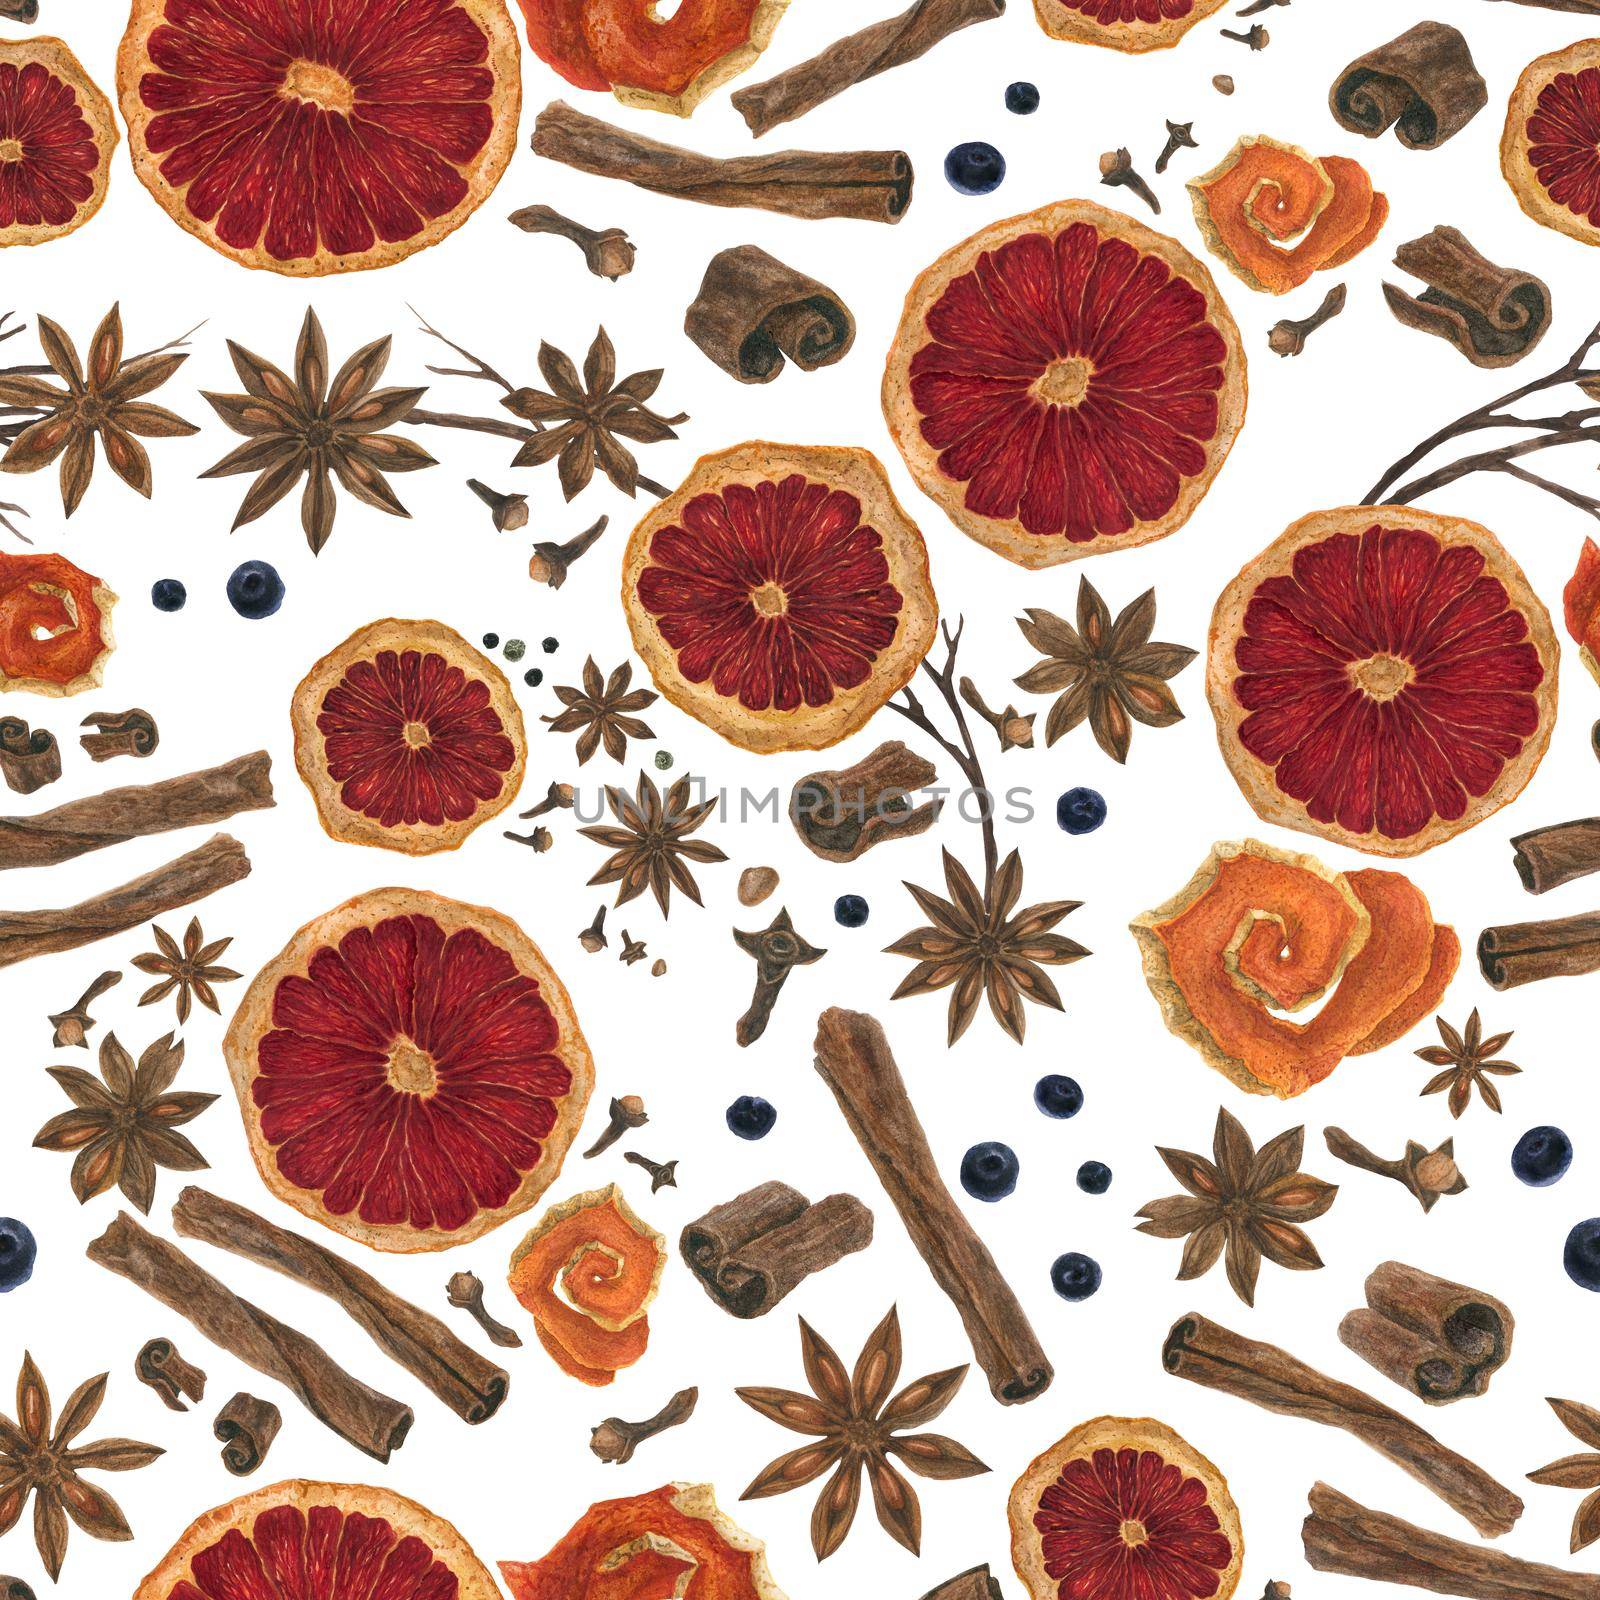 Christmas winter spices in realistic watercolor seamless pattern by Xeniasnowstorm